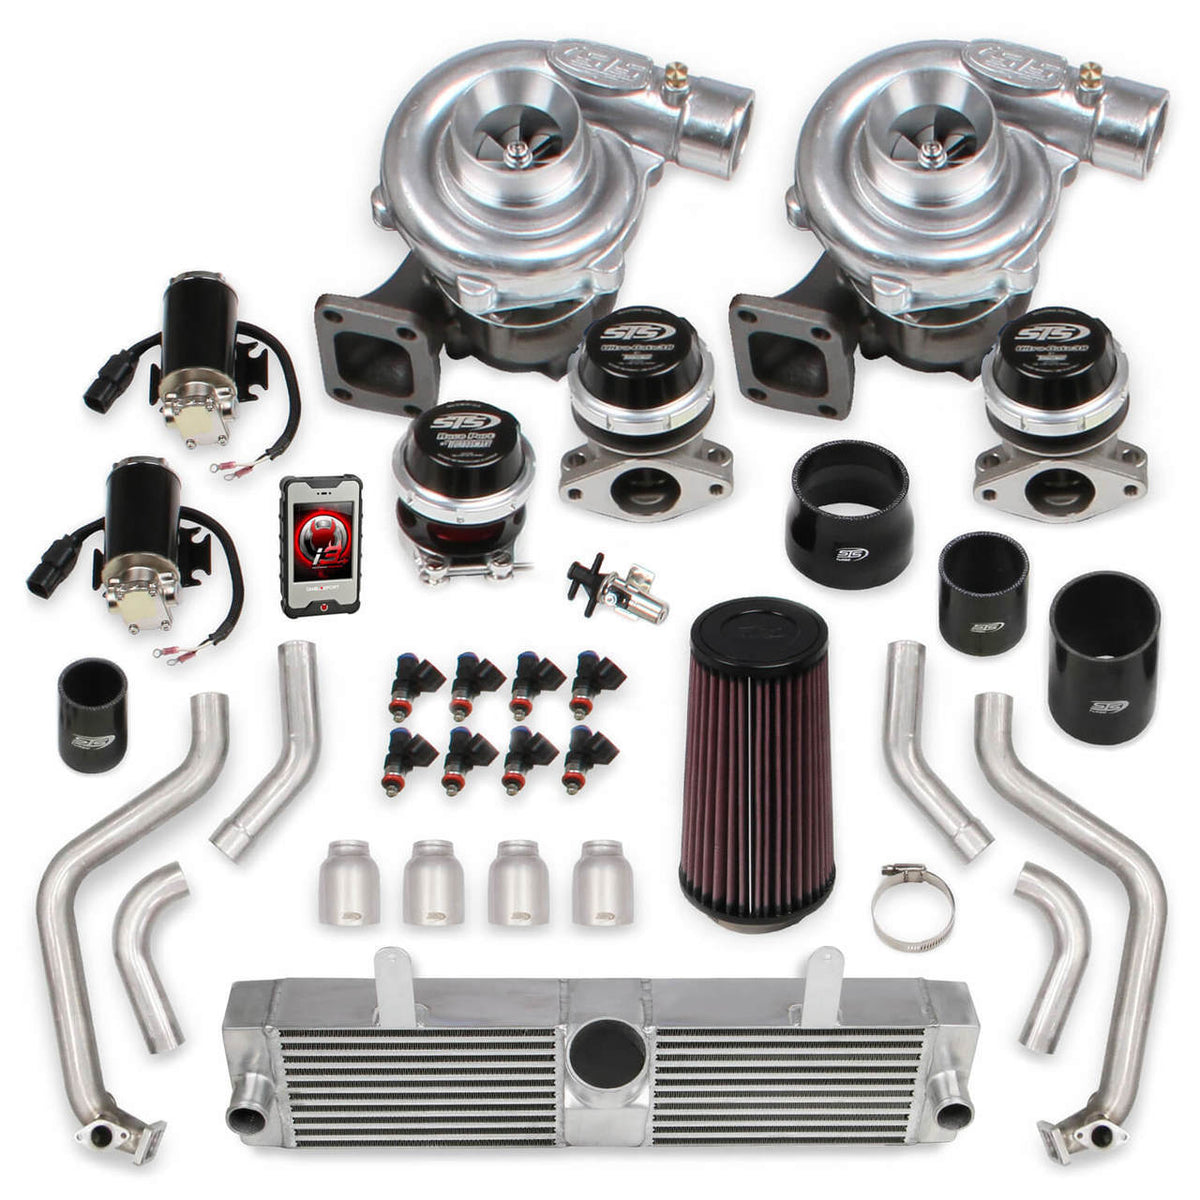 2005-2007 CORVETTE C6 W/LS2 STS REAR MOUNTED TWIN TURBO SYSTEM TUNING KIT